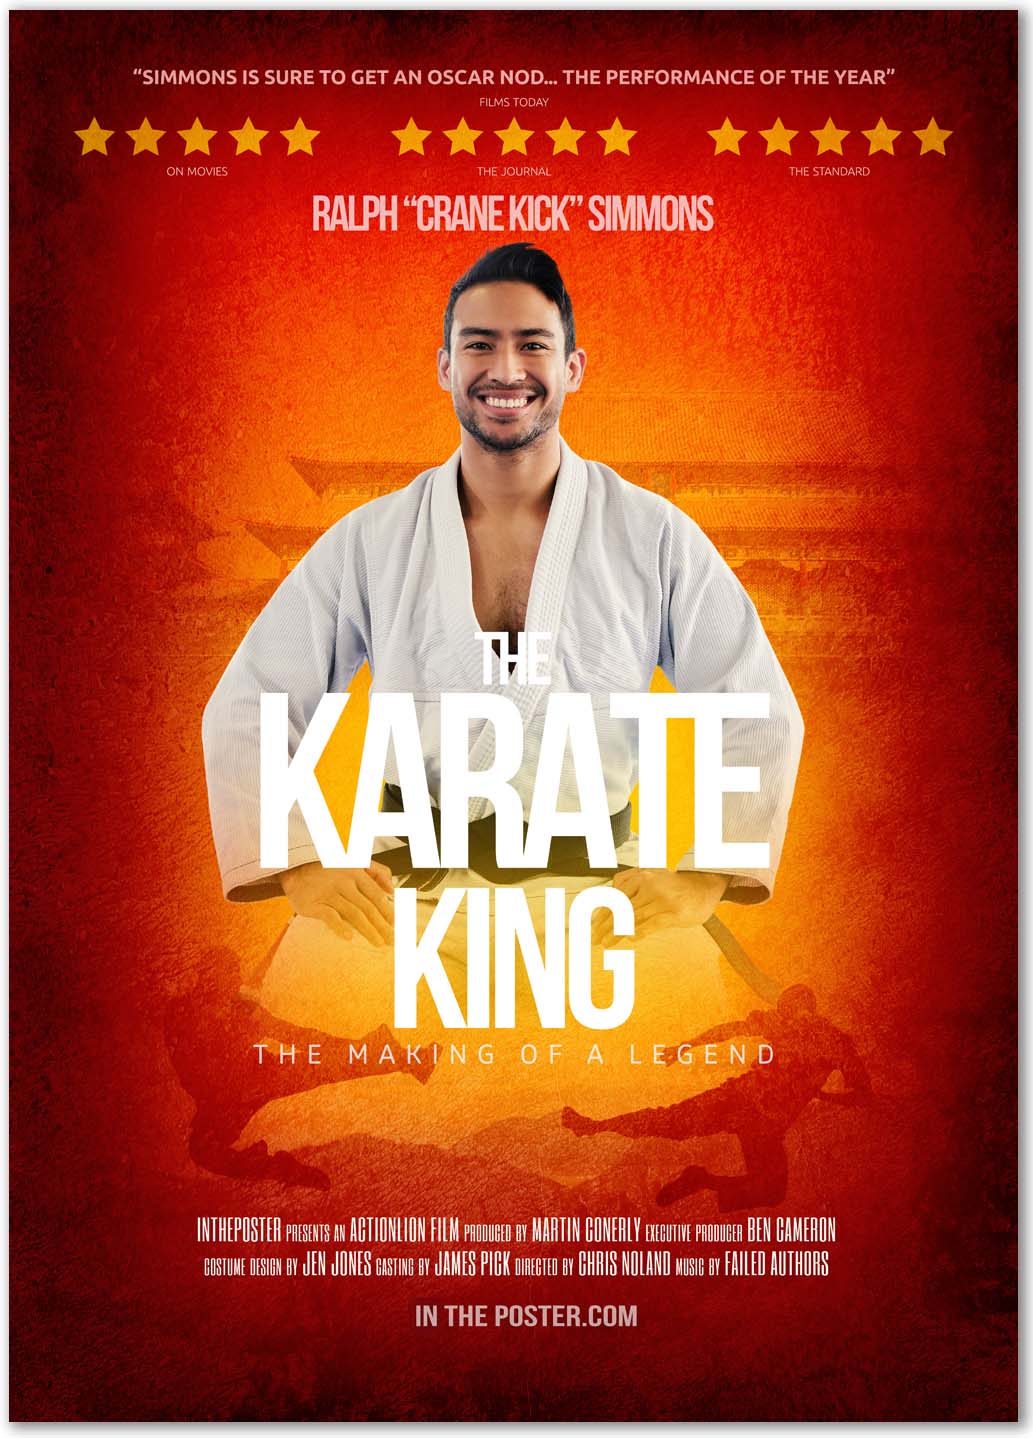  Movie poster titled &#39;The Karate King - The Making of a Legend&#39; featuring a smiling man in a white karate gi, accolades at the top, actor&#39;s name Ralph &#39;Crane Kick&#39; Simmons, and a gradient orange background with a silhouette of a karate kick; production credits and website listed at the bottom.